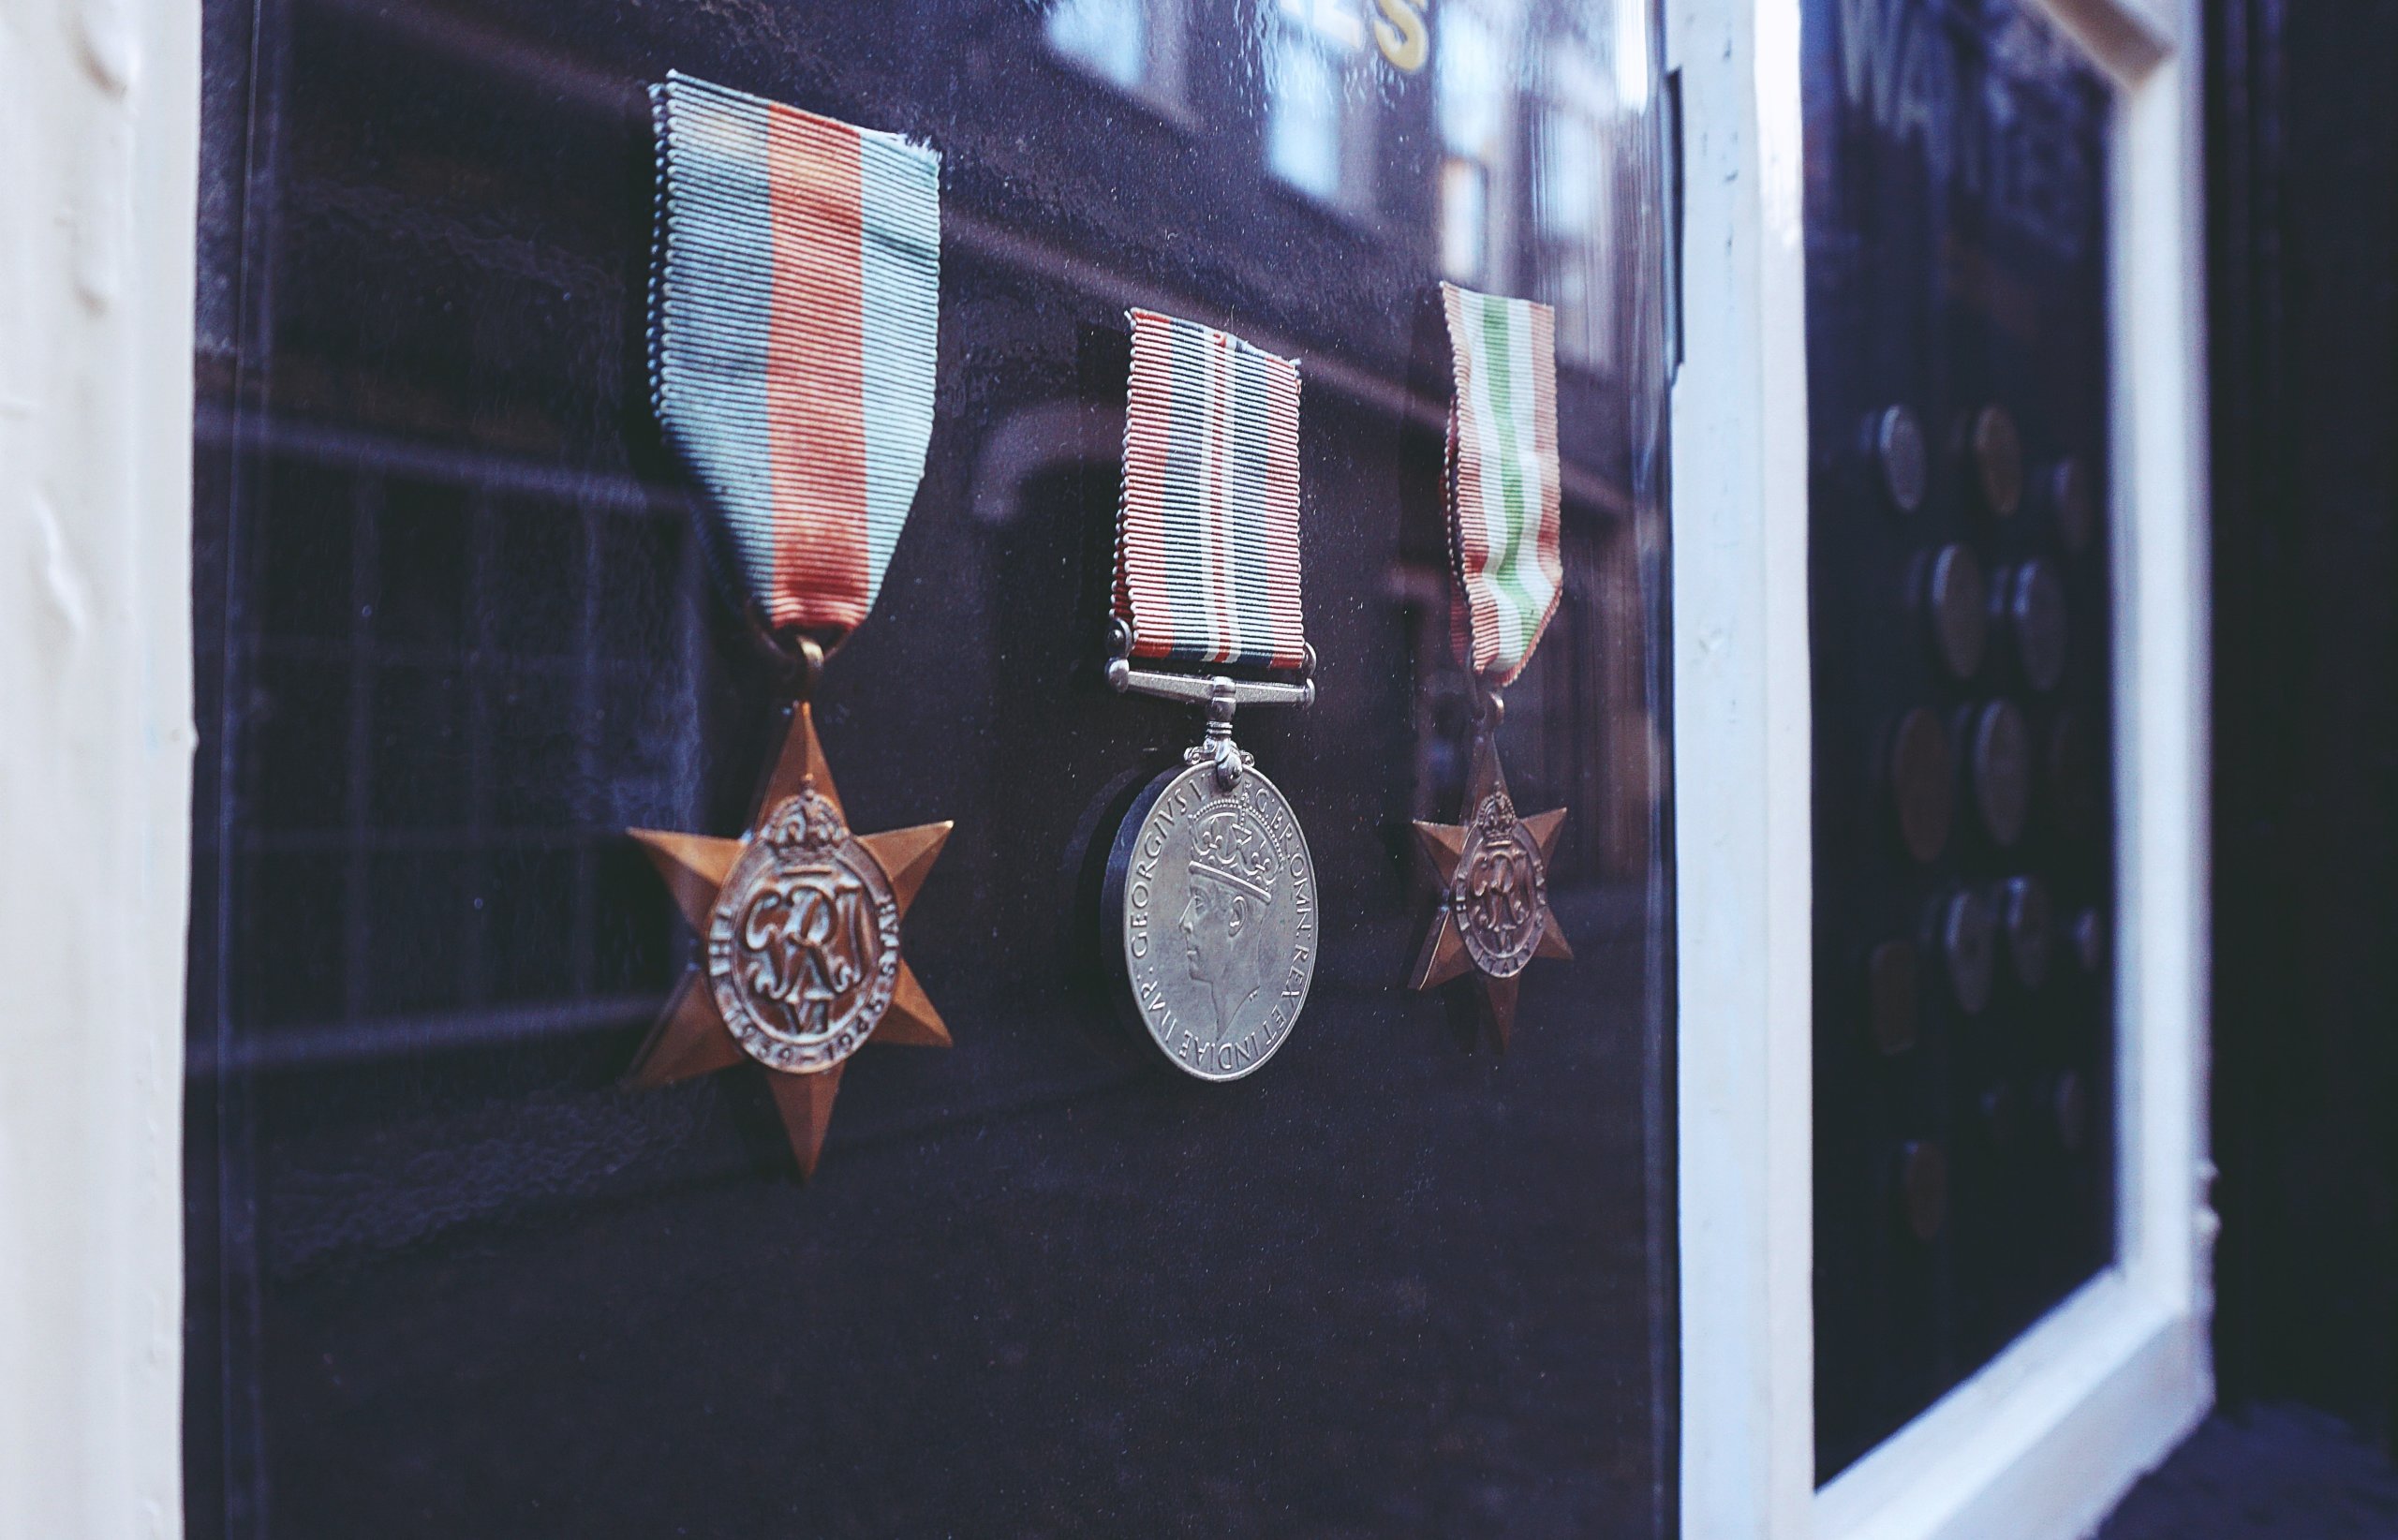 three-medals-in-glass-enclosure-2040276-scaled